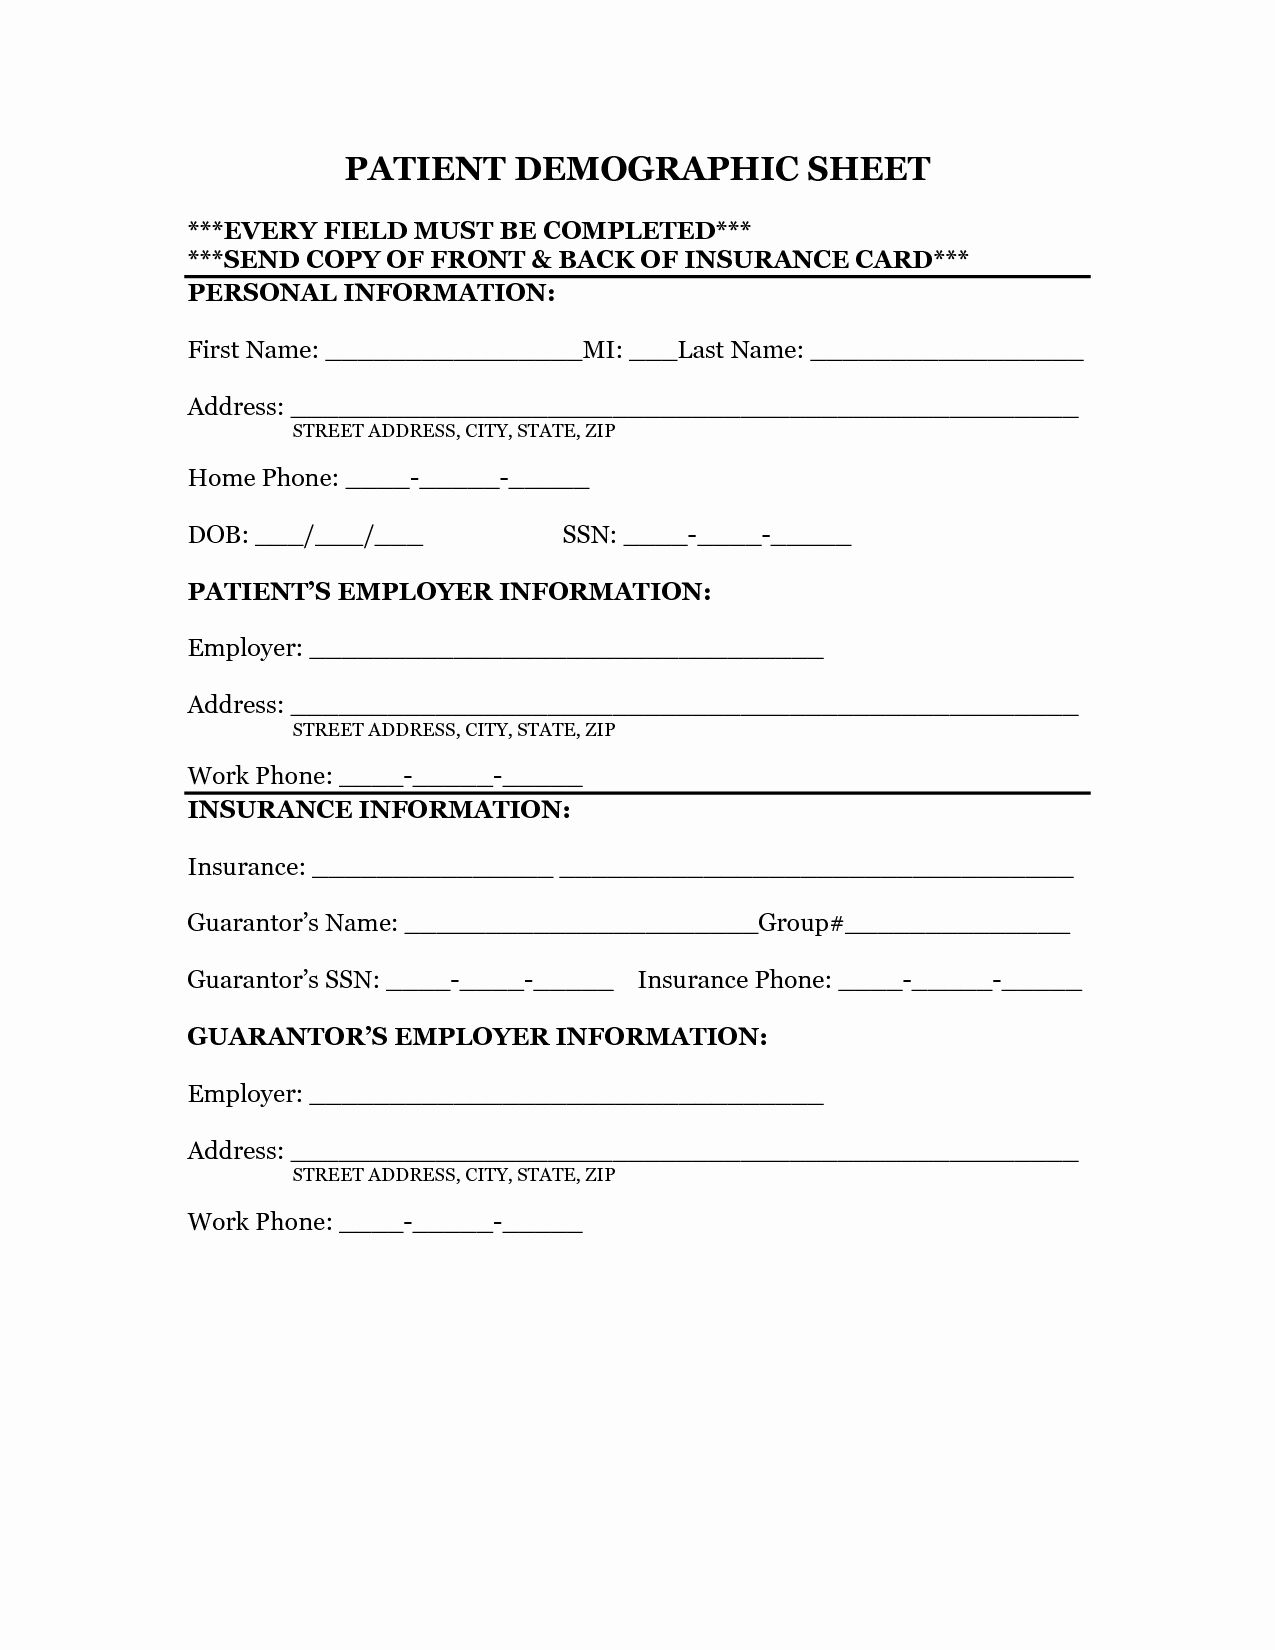 Patient Information form Template Inspirational Printable Demographic forms Related Keywords Printable